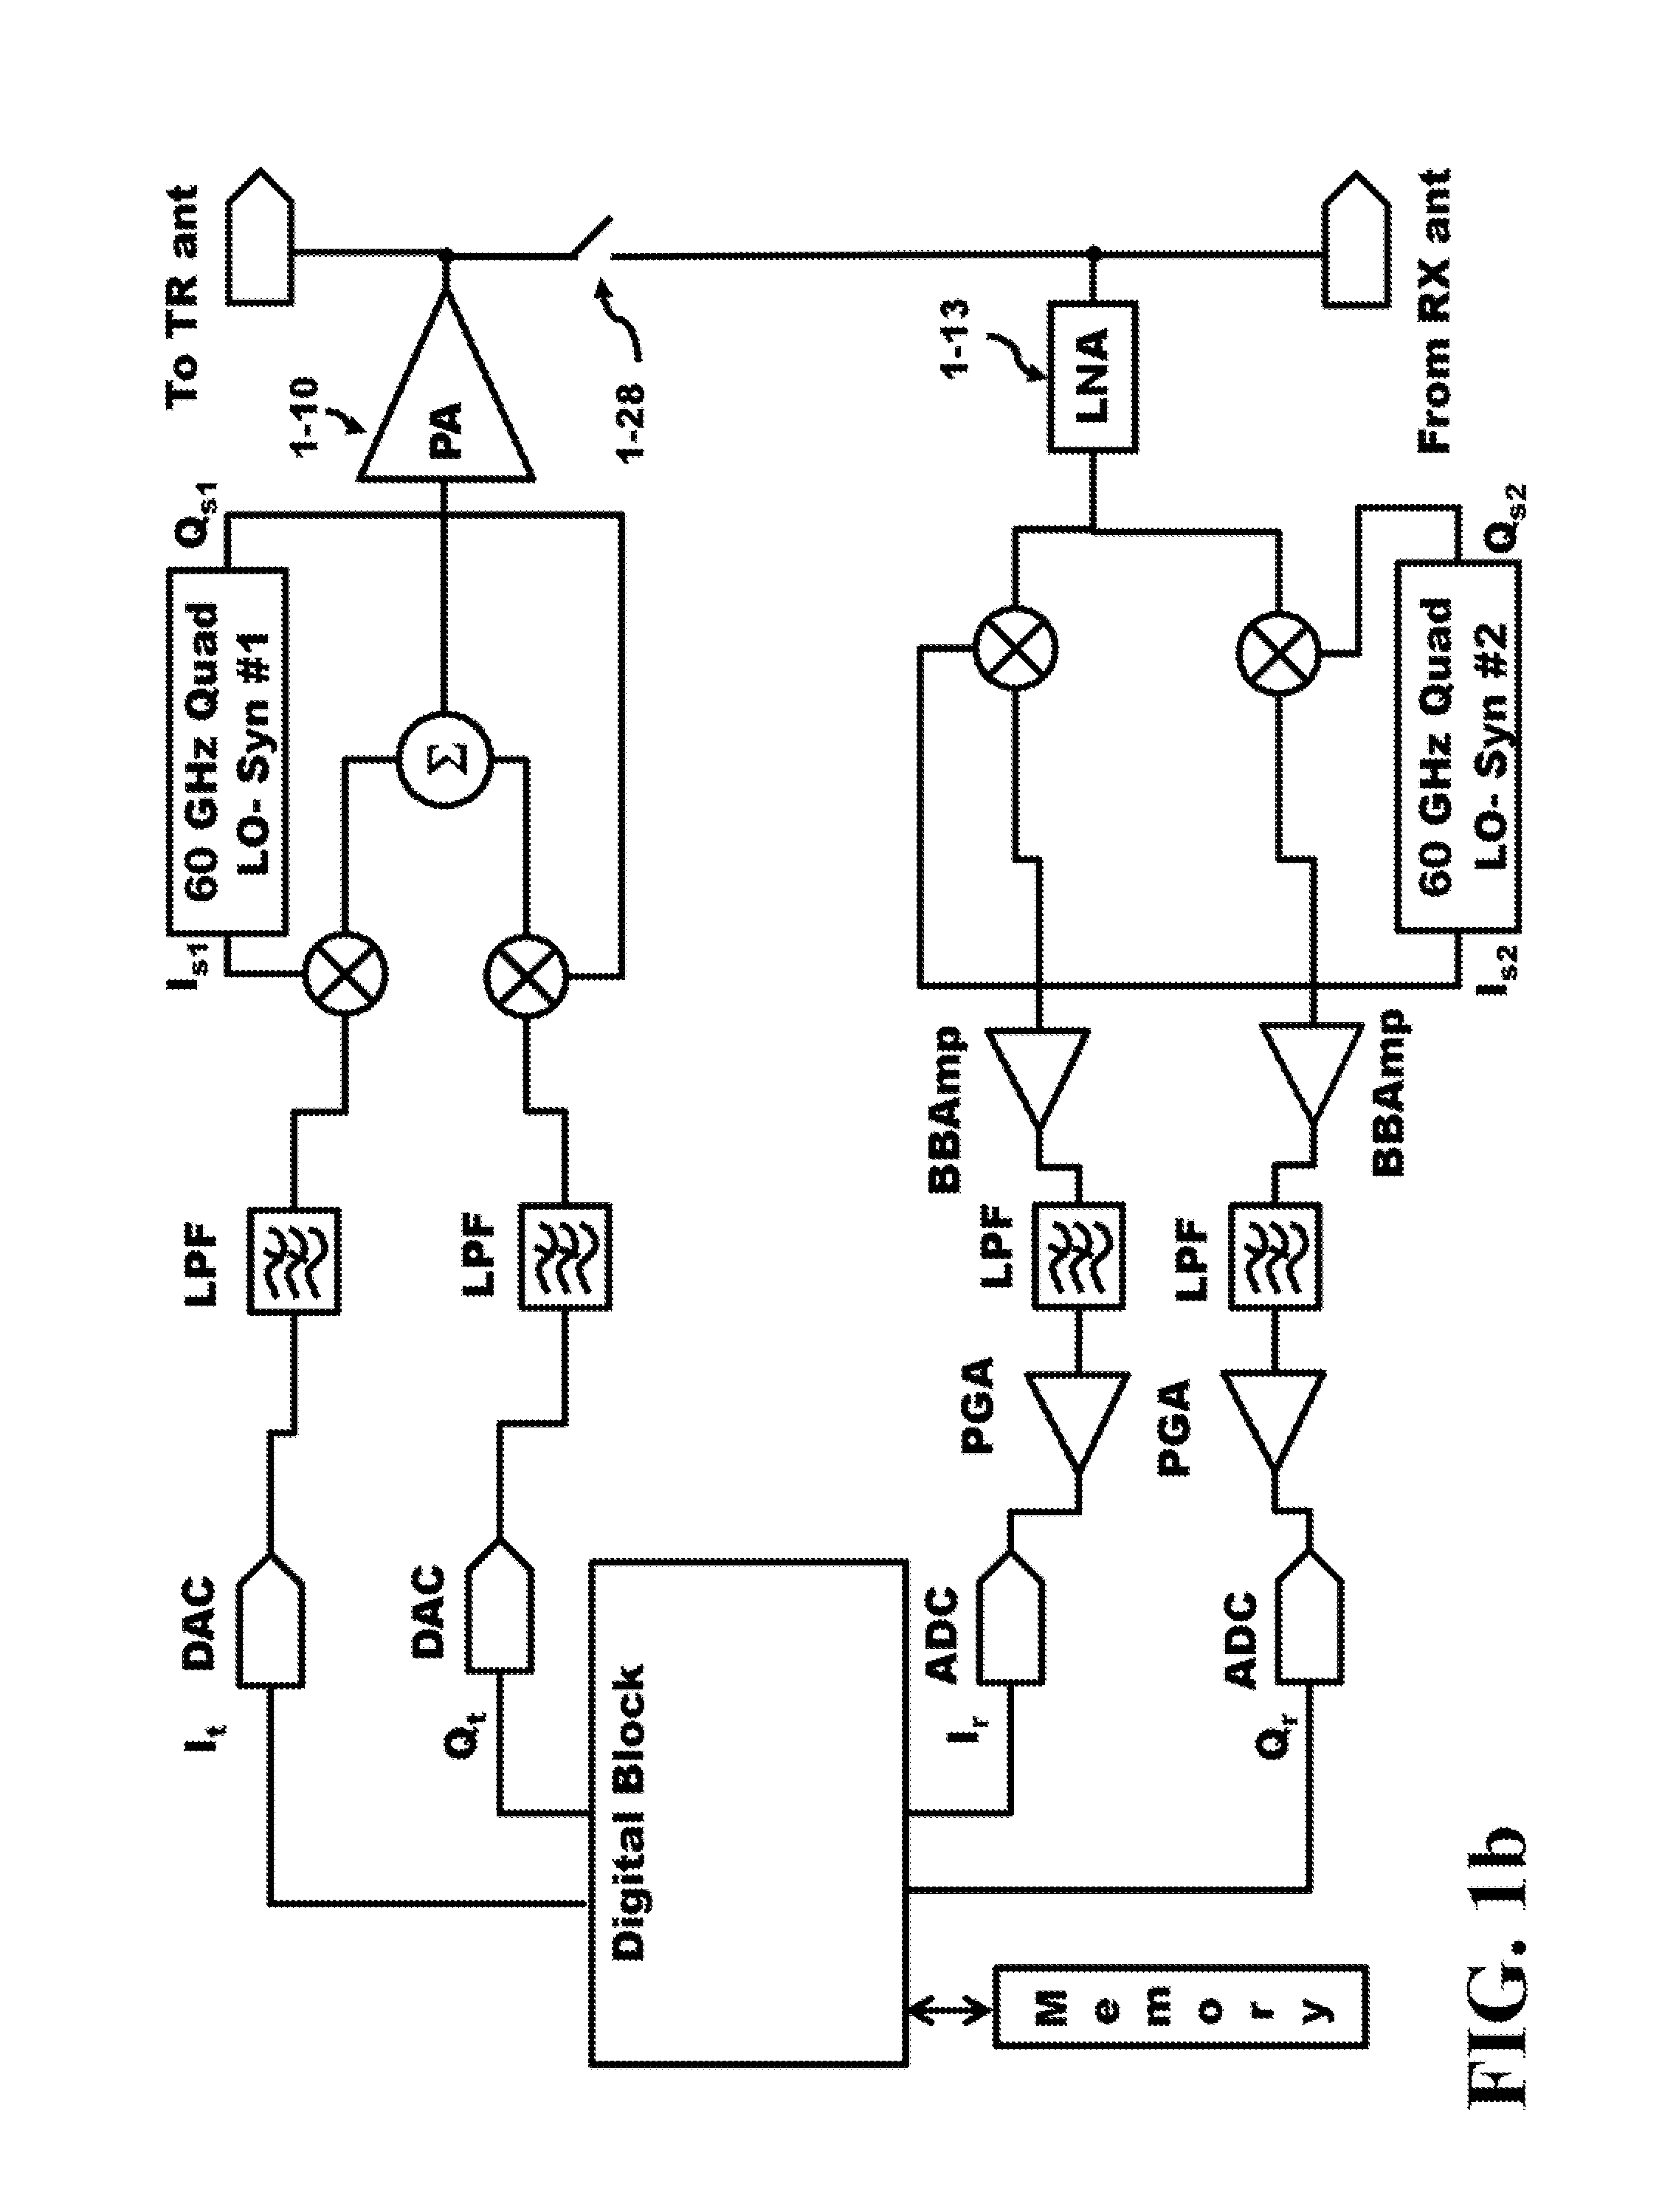 Method and Apparatus of Transceiver Calibration Using Substrate Coupling